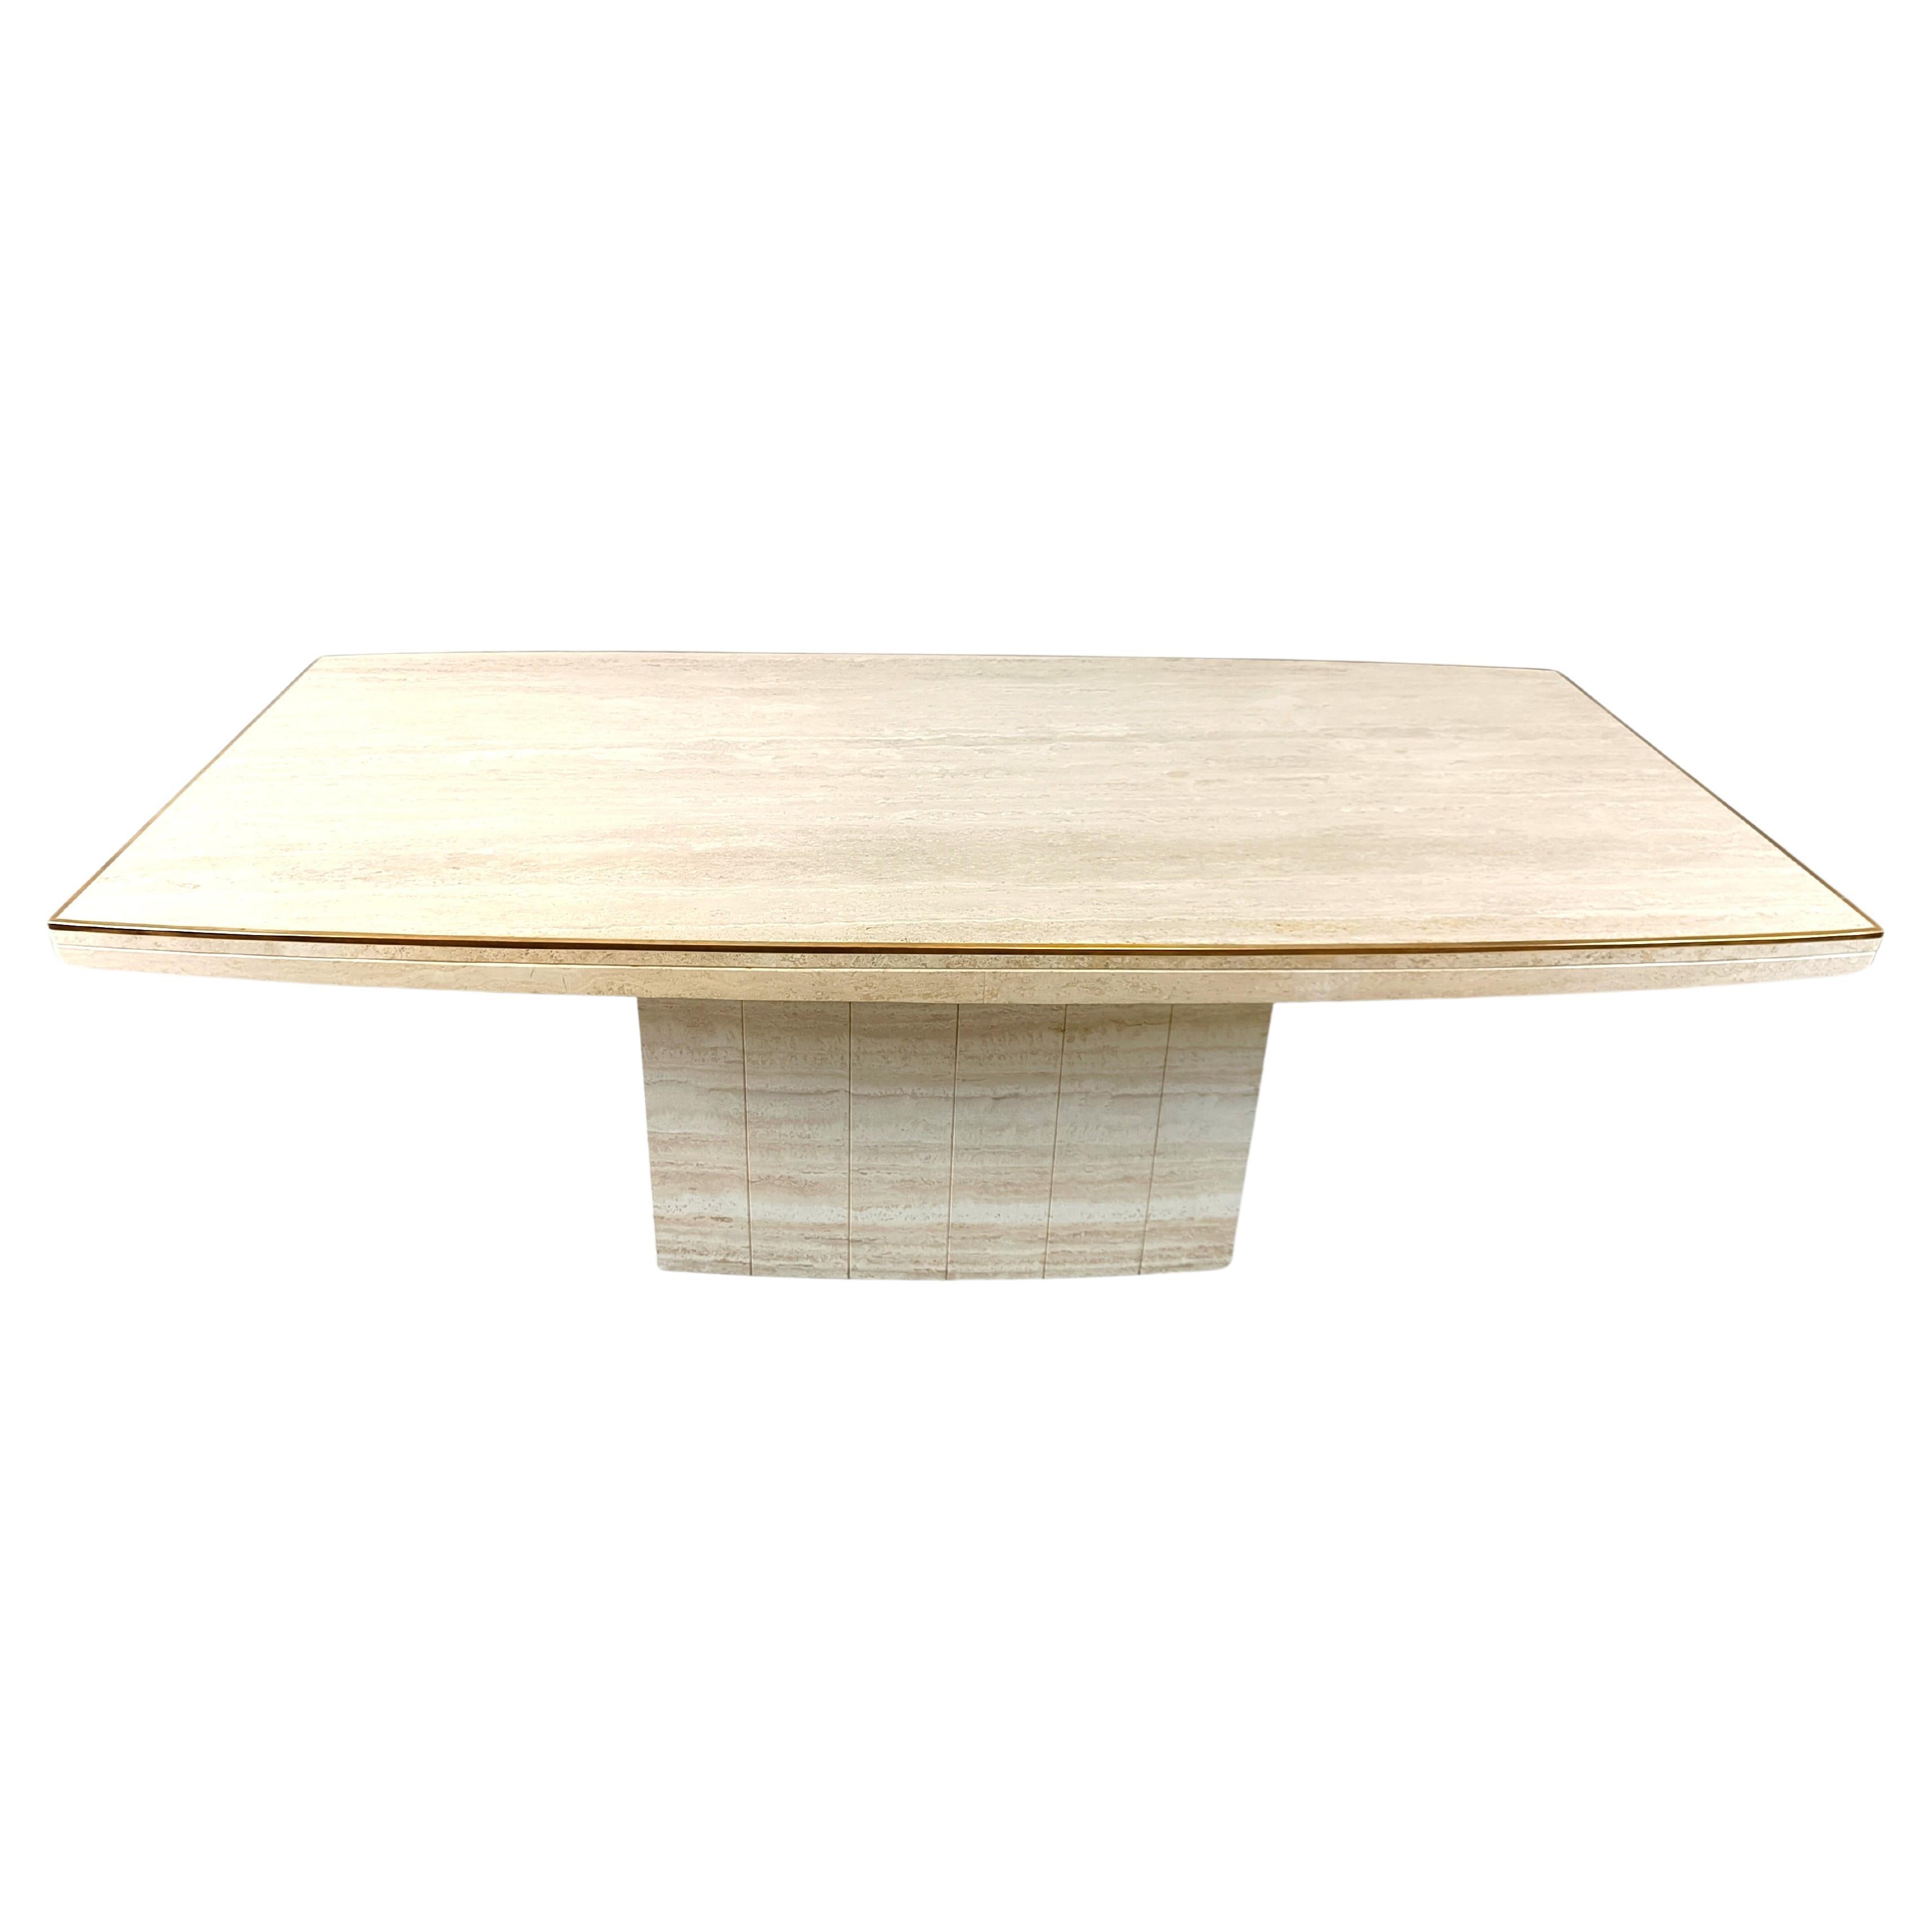 Travertine and brass dining table by Jean Charles, 1970s For Sale